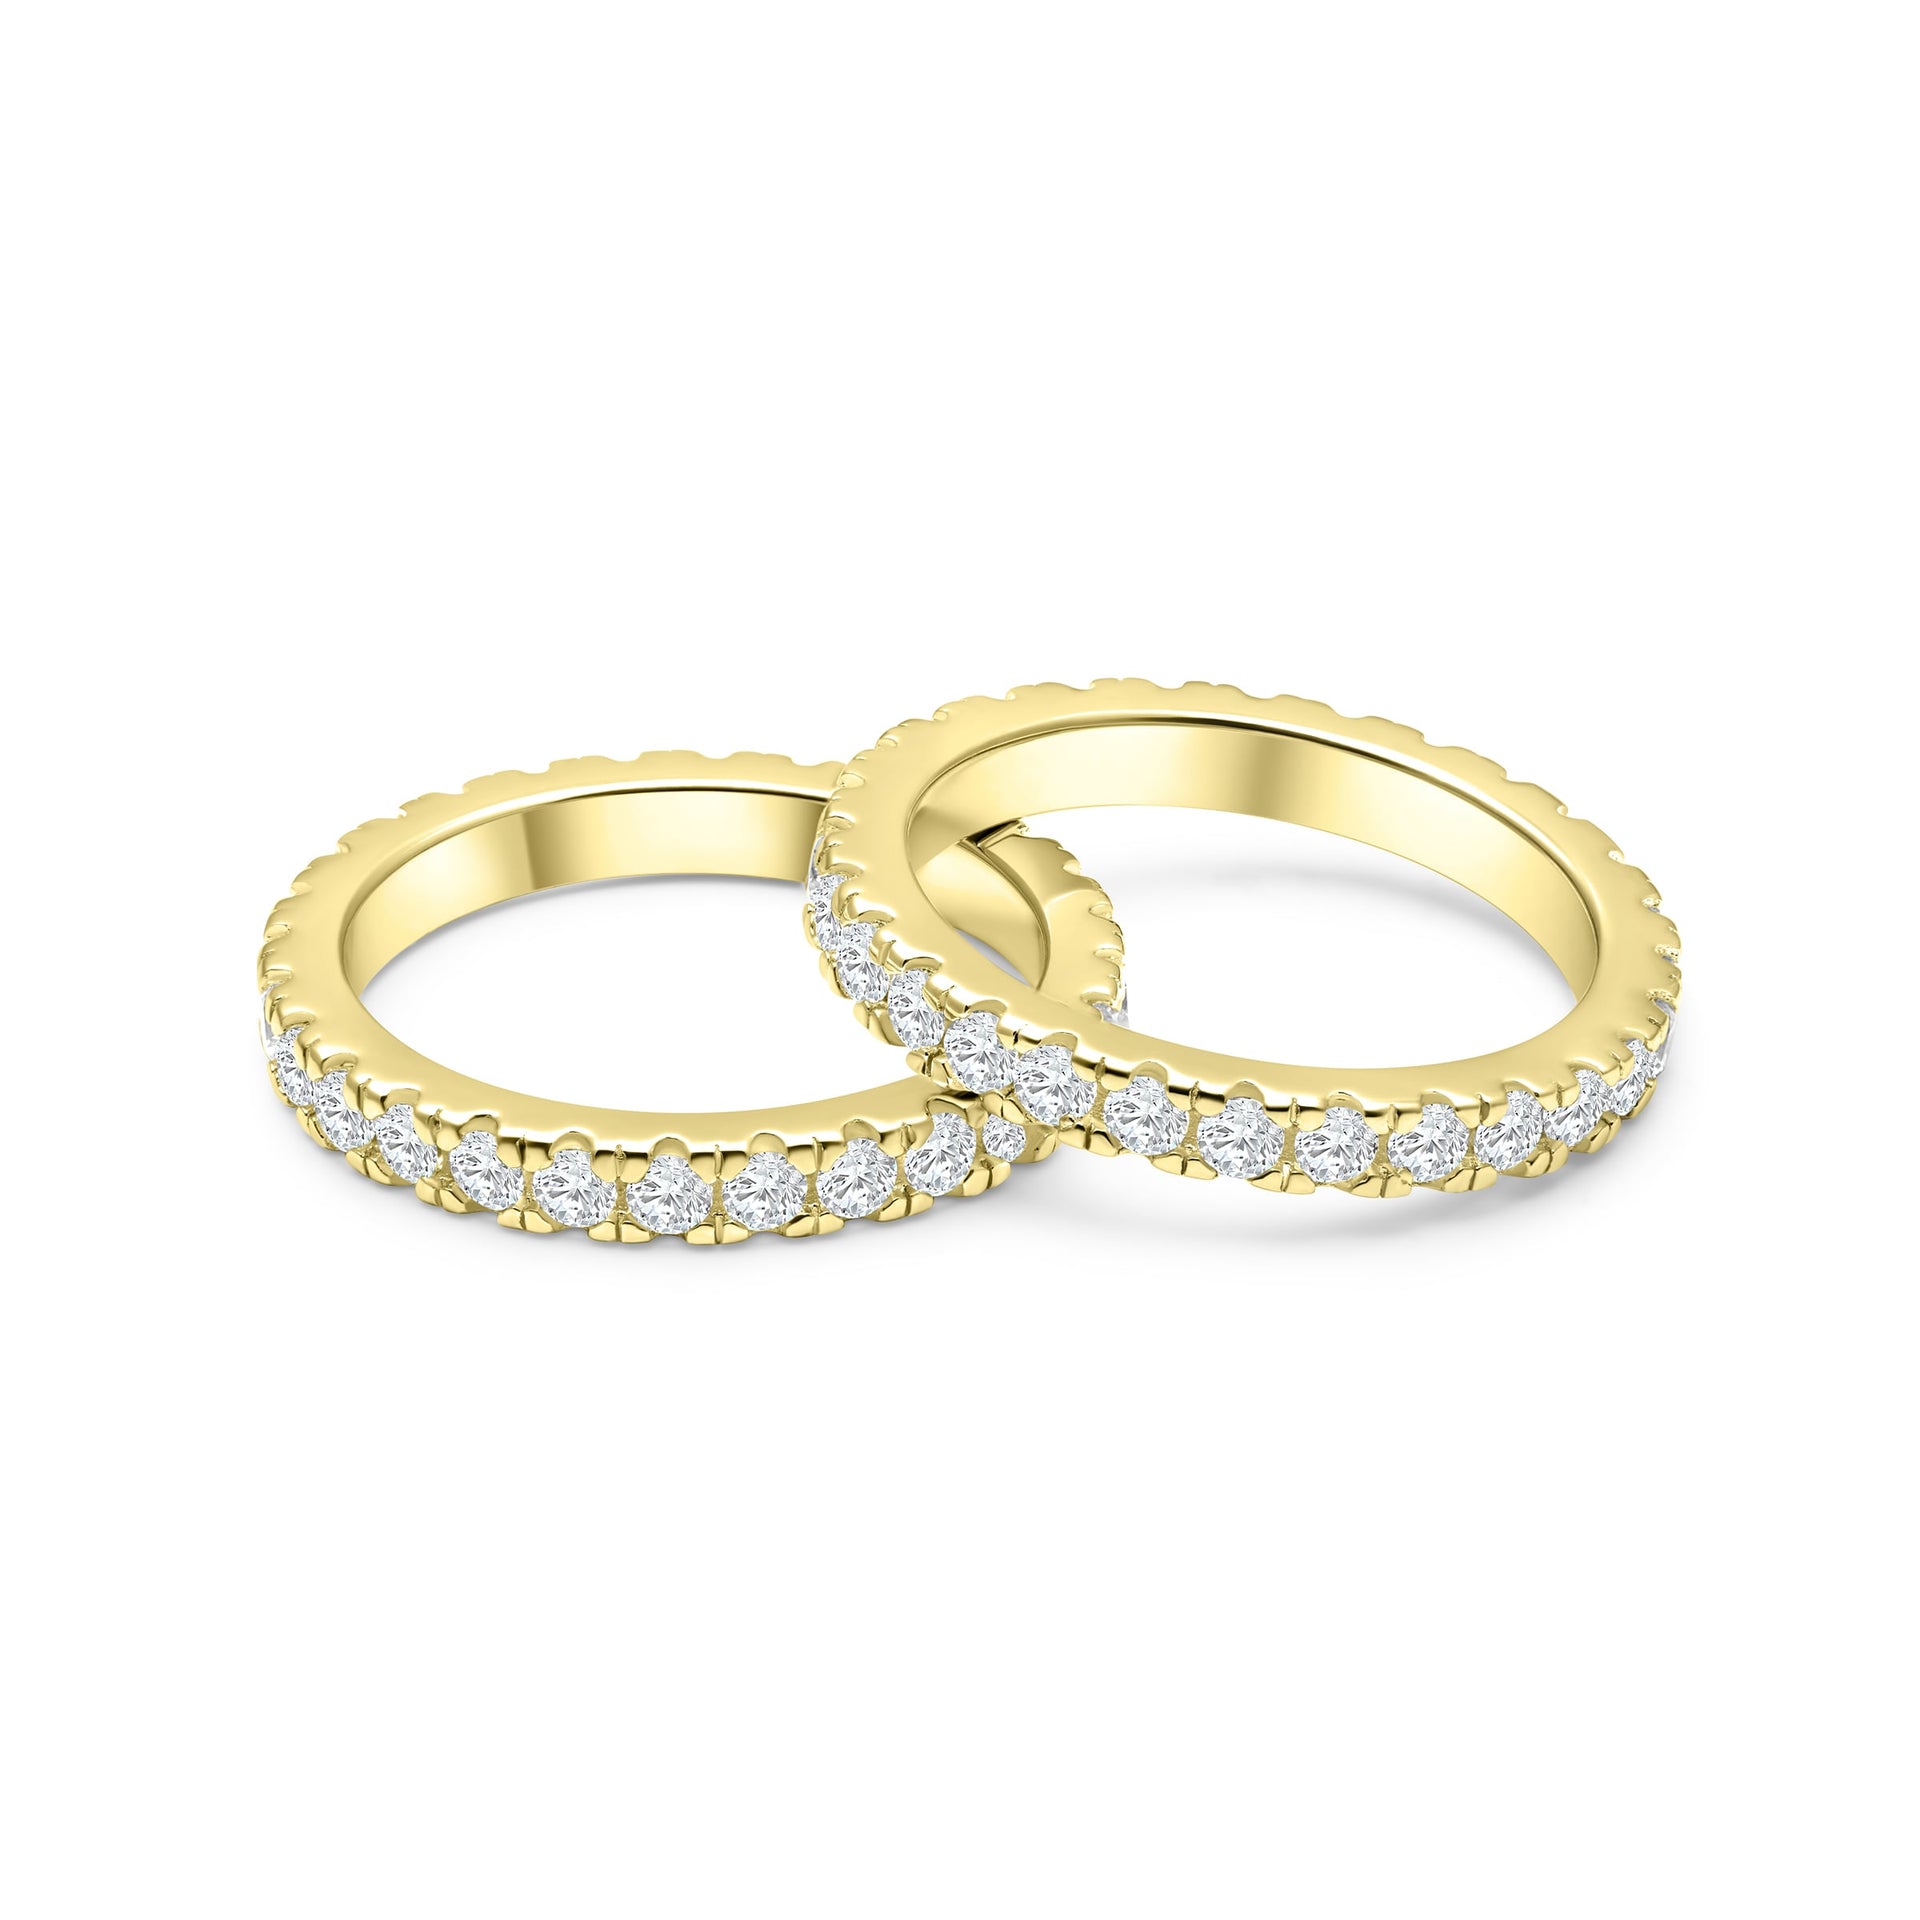 top view of two gold eternity wedding bands, with one band slightly resting atop of the other